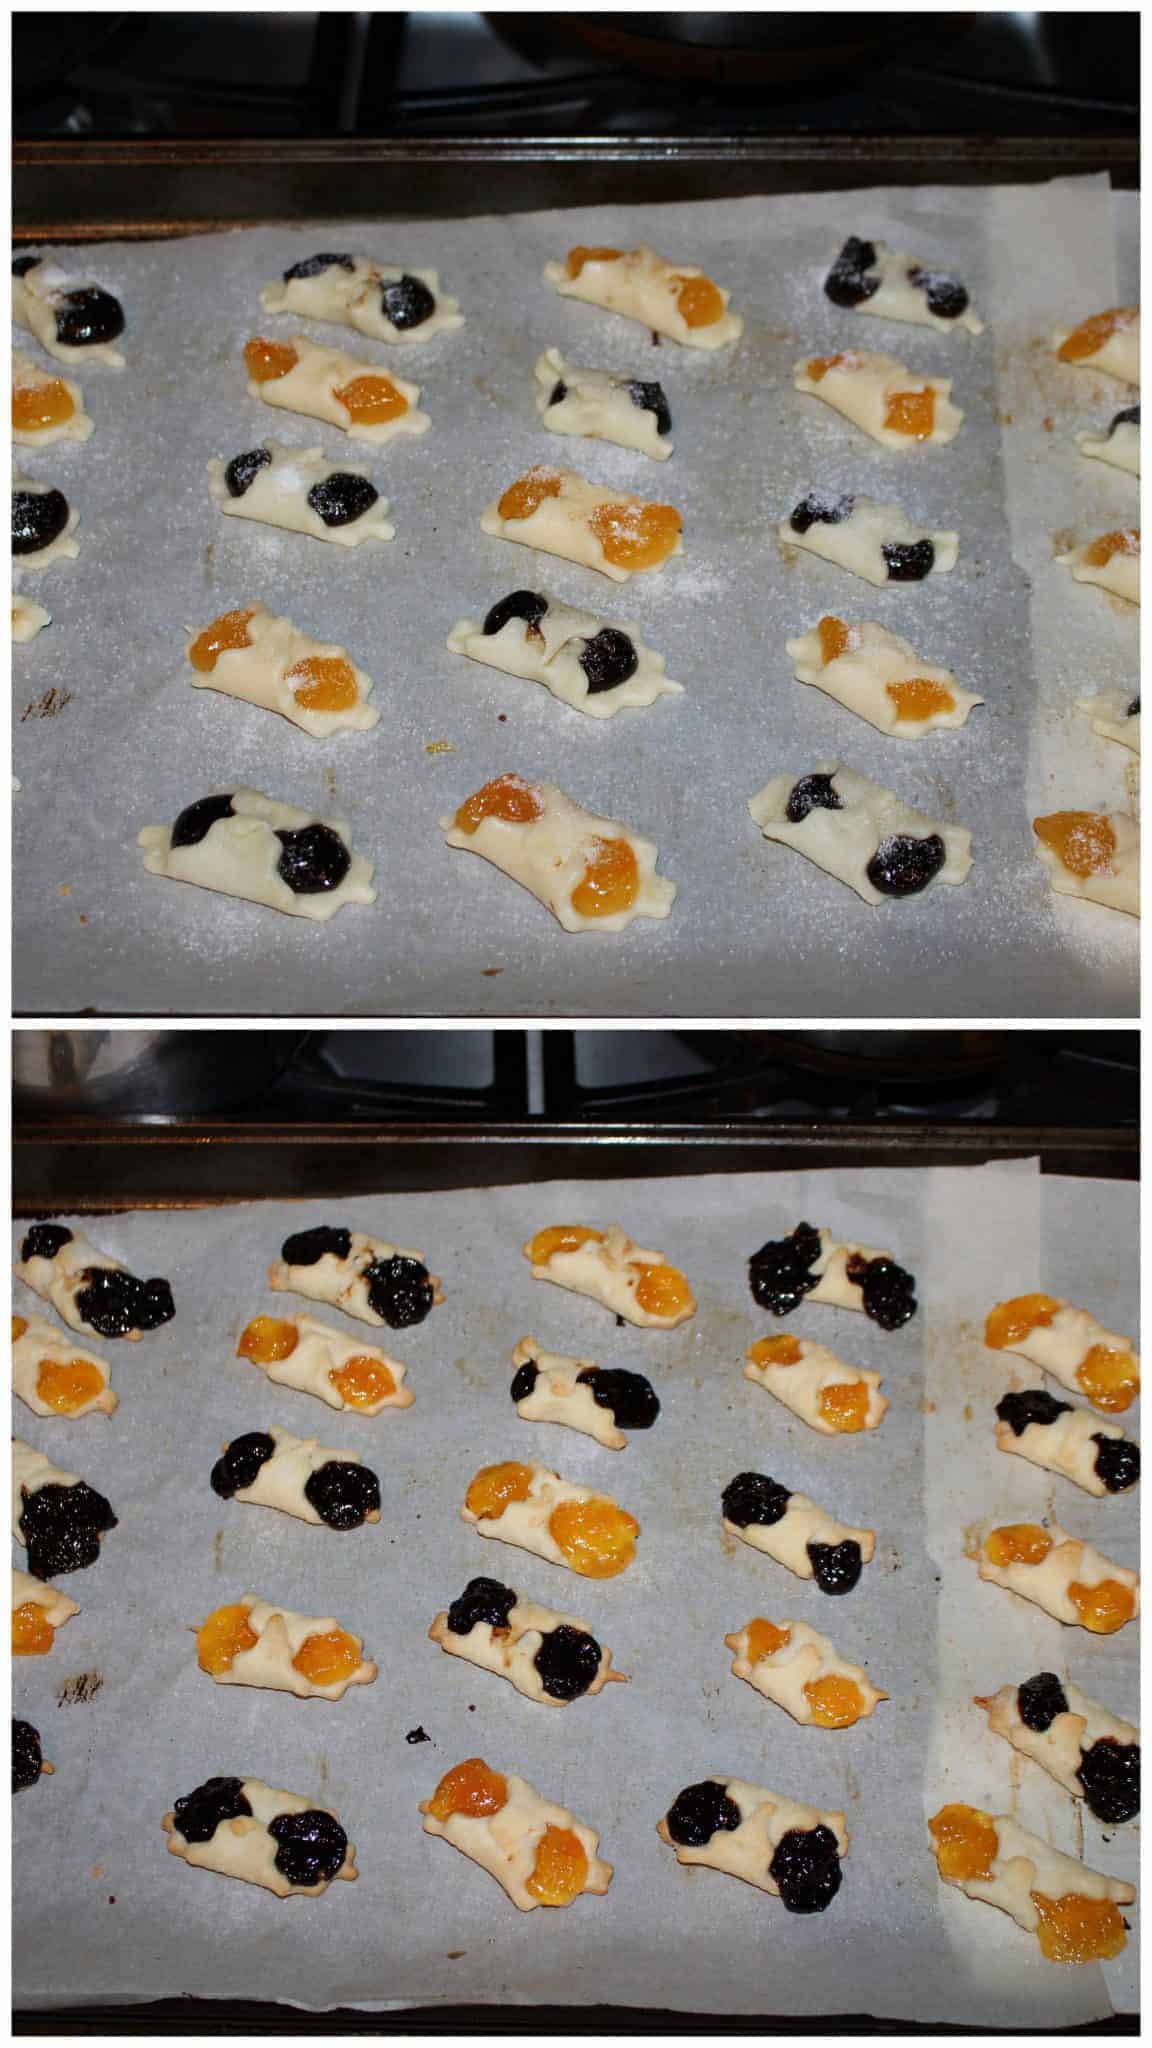 Baking the pastry in oven